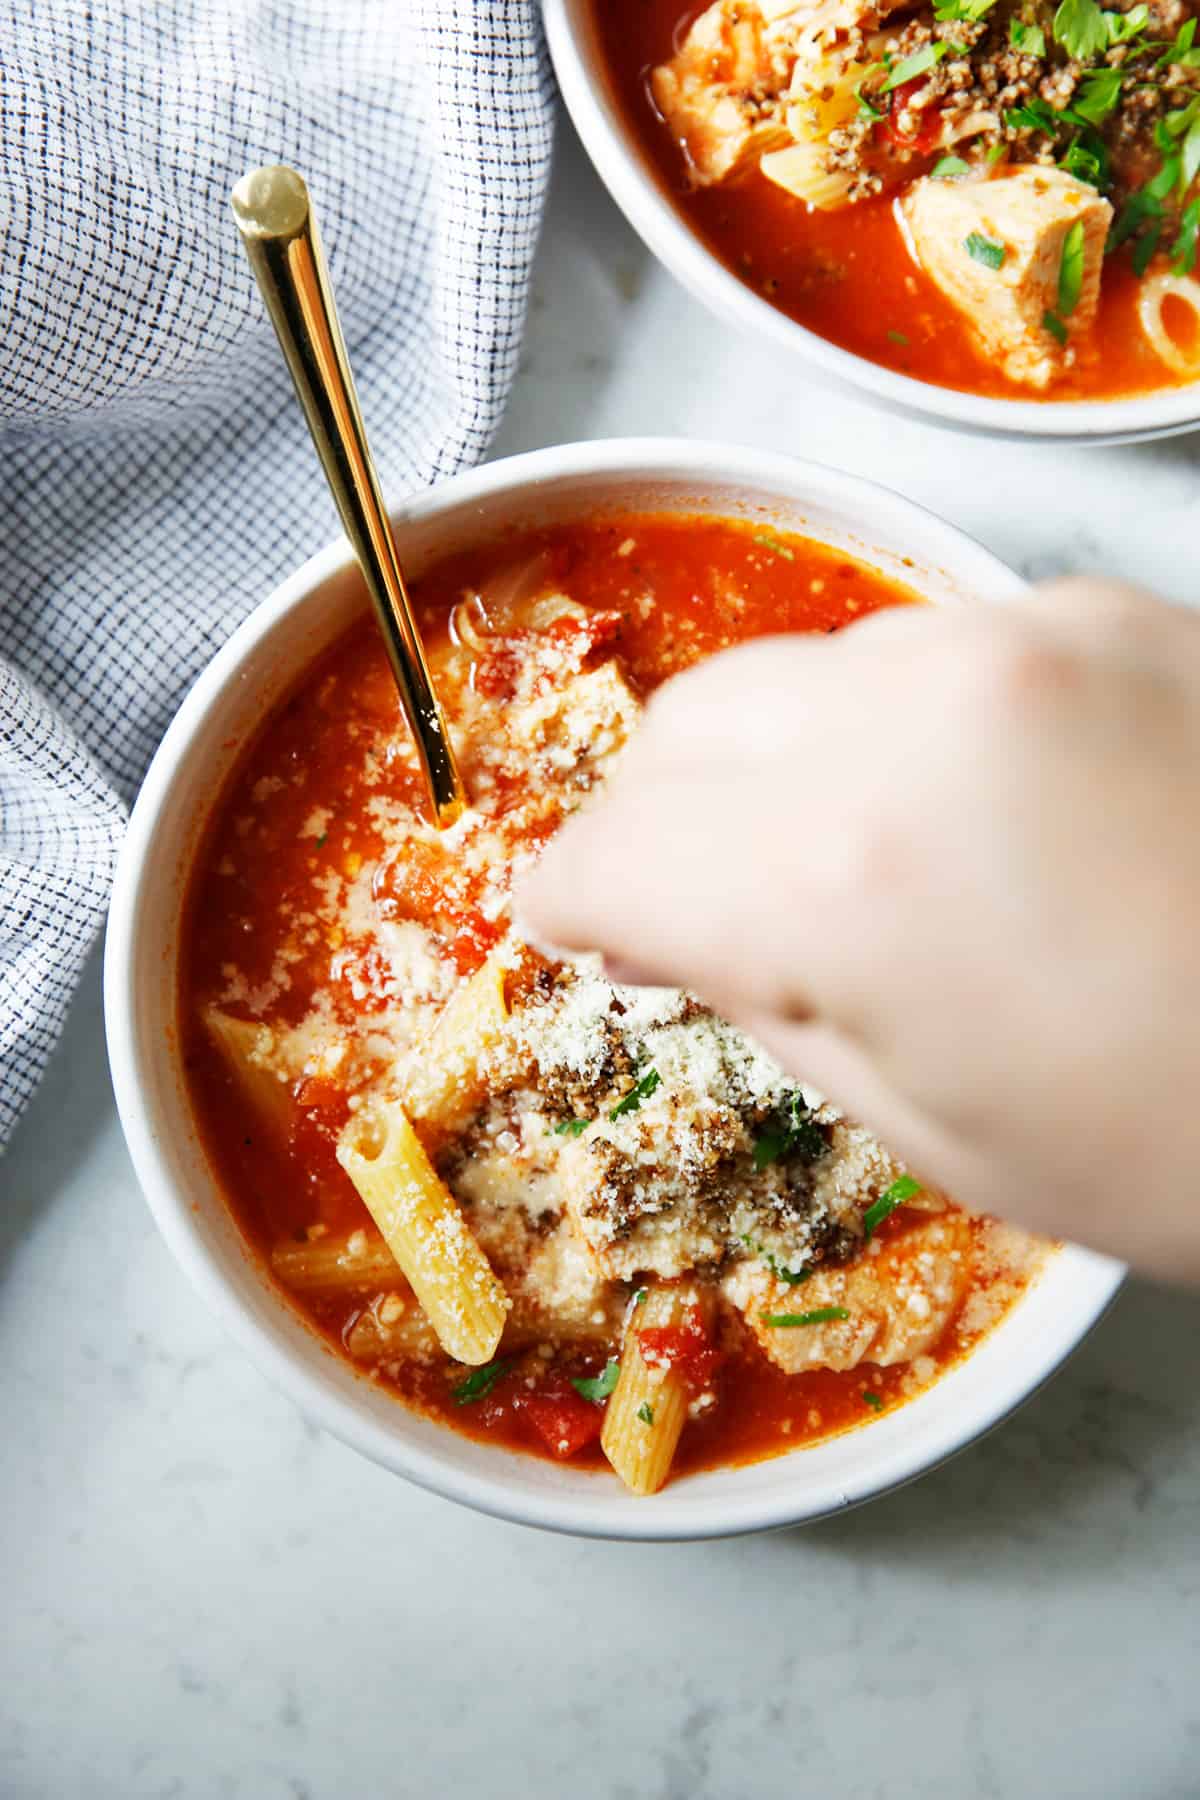 Sprinkling Parm on chicken Parm soup